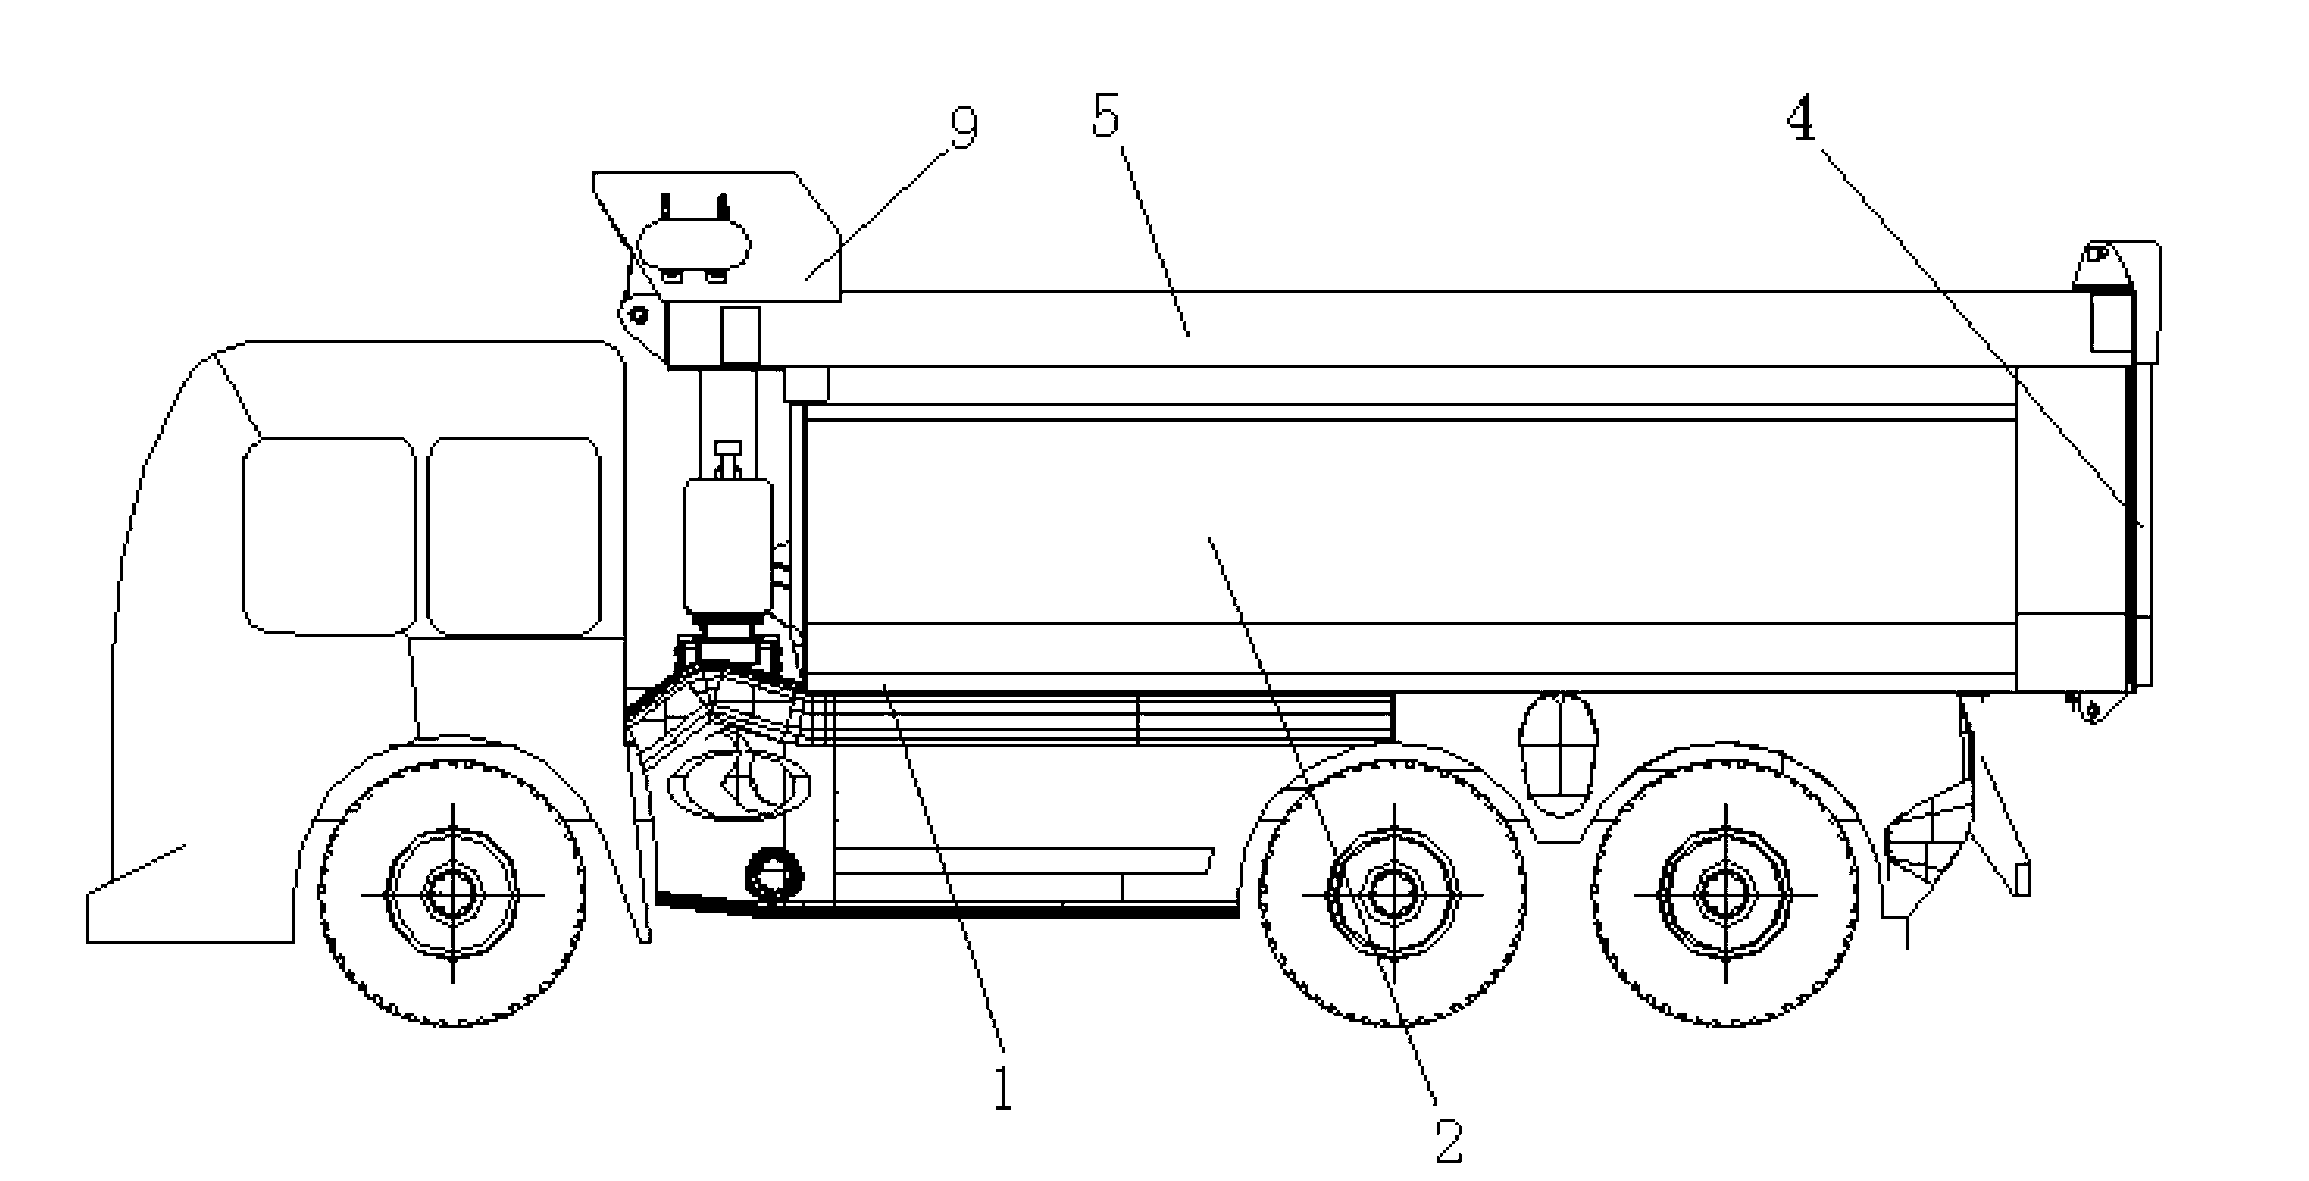 Residue soil dump vehicle with built-in horizontal-pushing environment-friendly top cover system